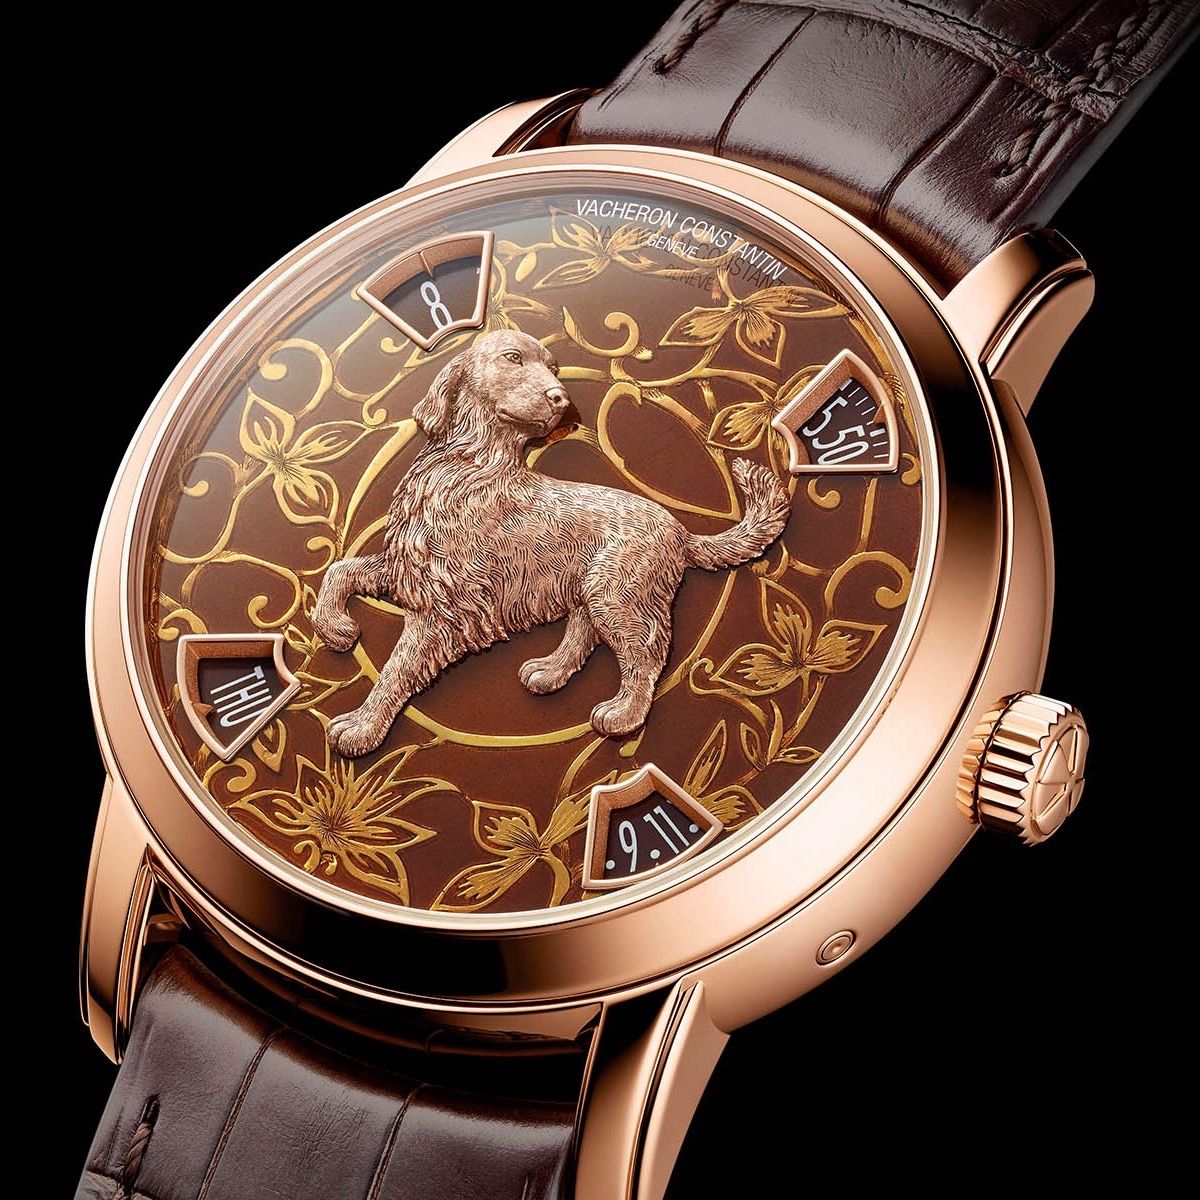 Vacheron Constantin Métiers d'Art The legend of the Chinese zodiac - Year of the dog